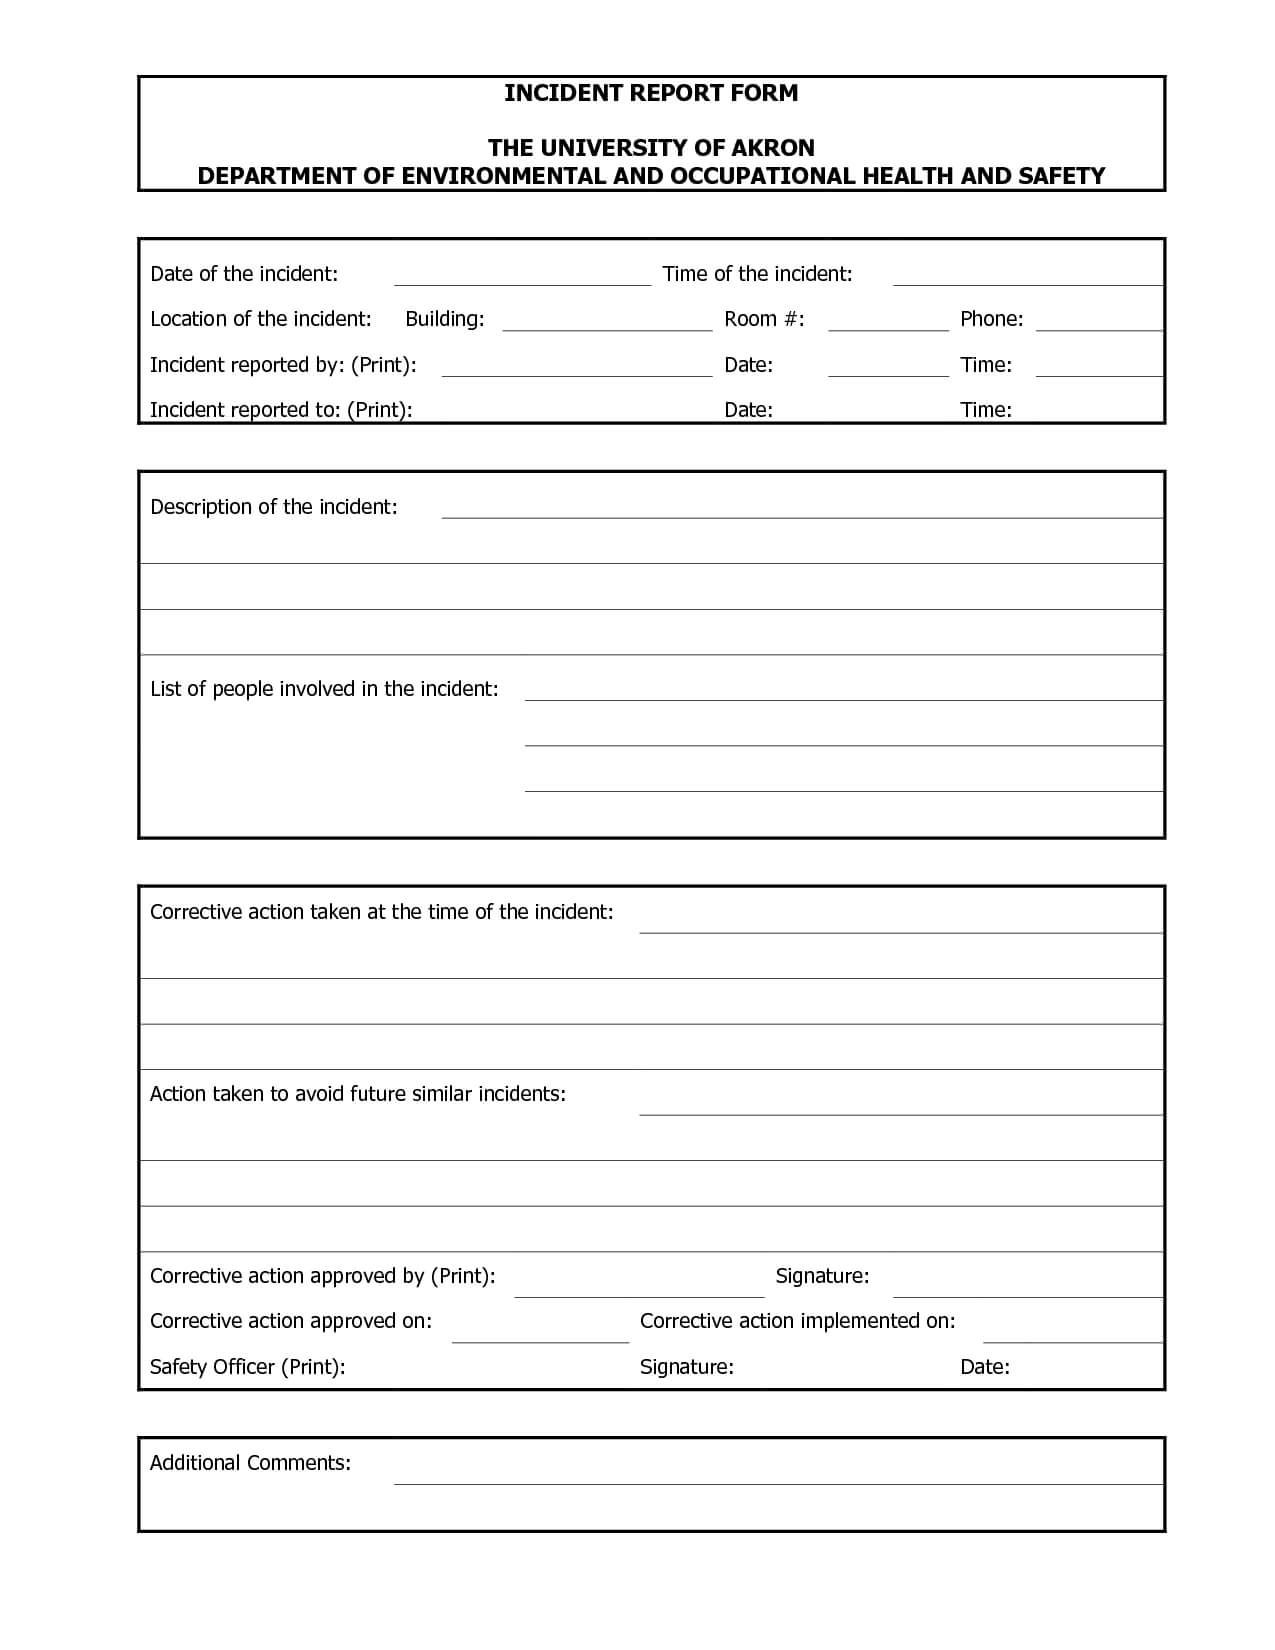 Blank Incident Report Form Template ] – Blank Incident Within Incident Report Form Template Word